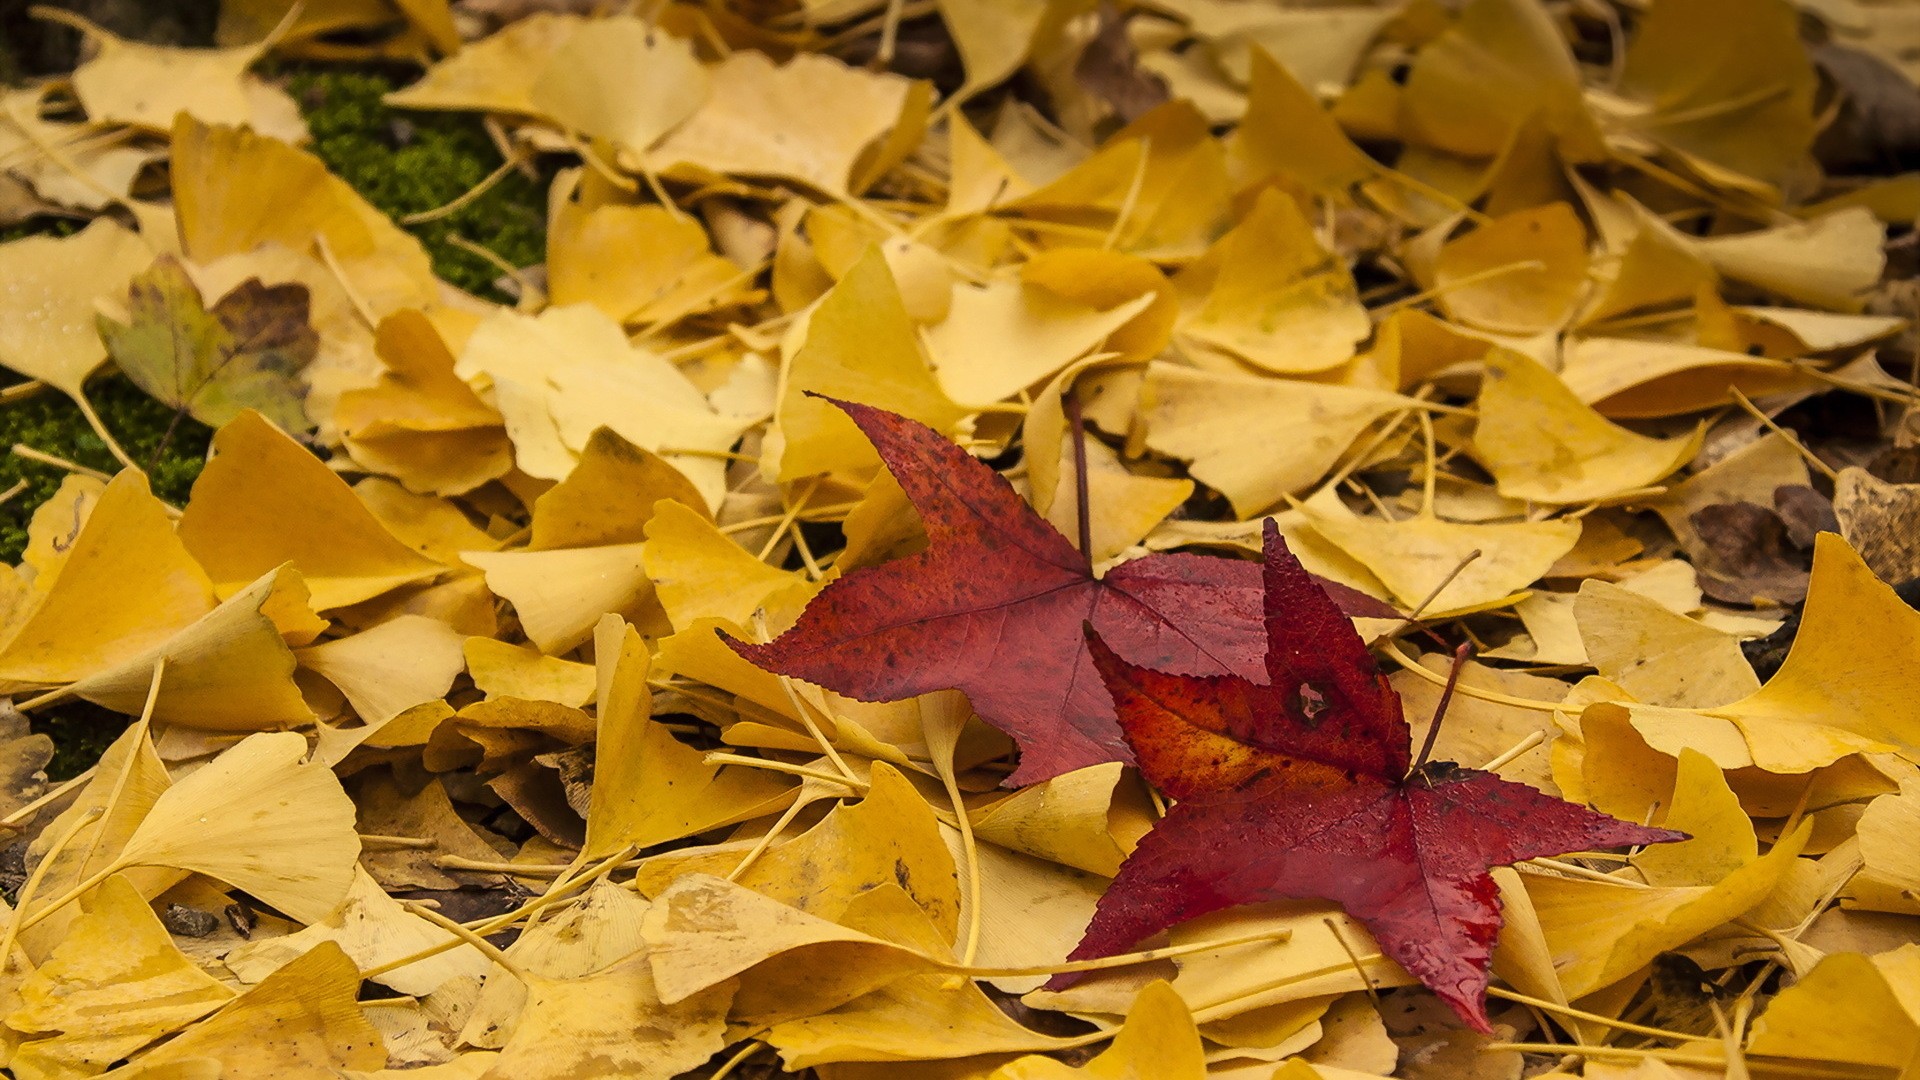 General 1920x1080 nature leaves fall grass yellow depth of field outdoors fallen leaves plants